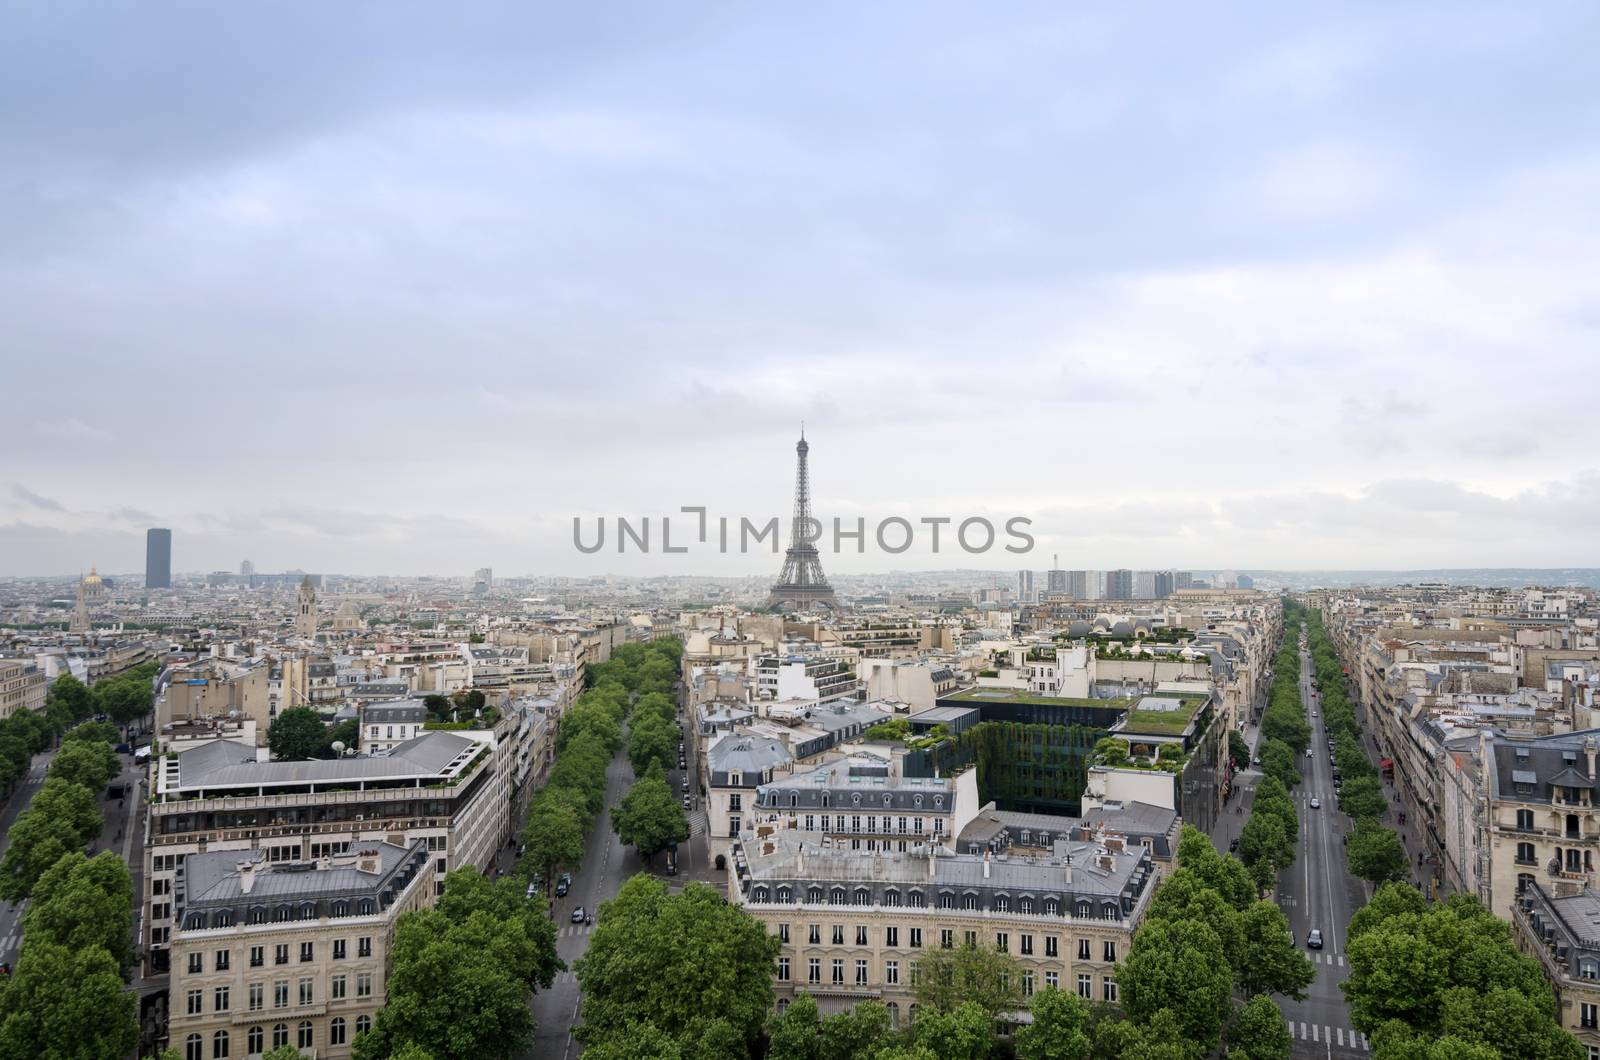 Eiffel Tower with Paris skyline view from the Arc de Triomphe in Paris, France